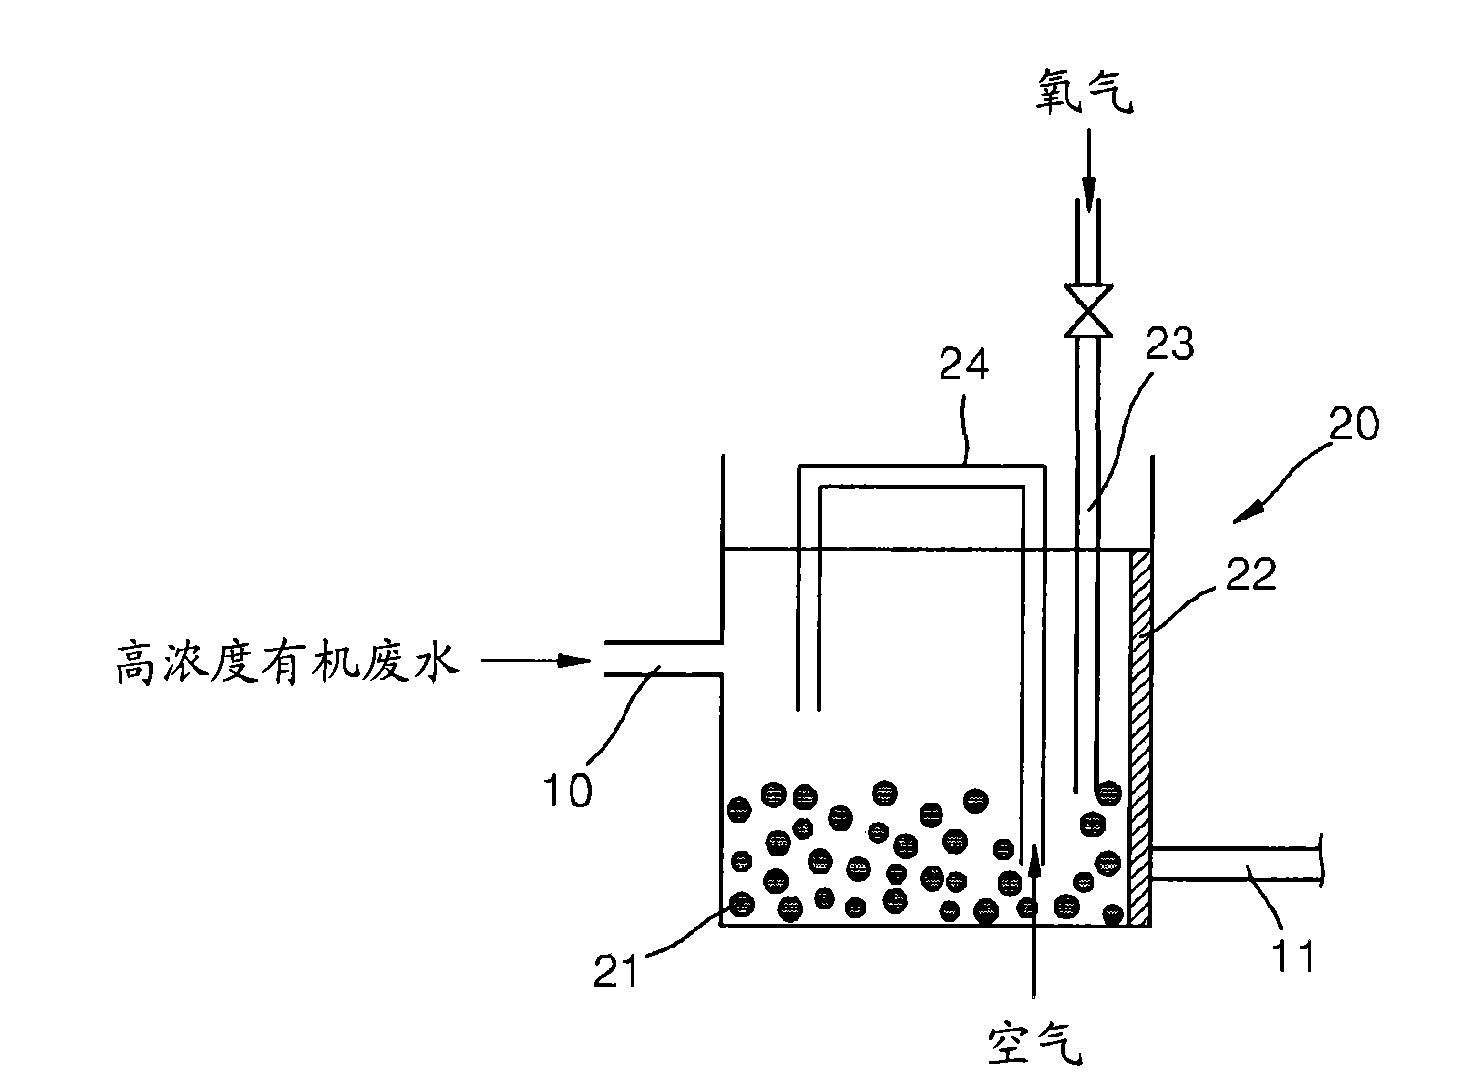 Apparatus for treating high concentration organic waste water and method of treating high concentration organic waste water using the same